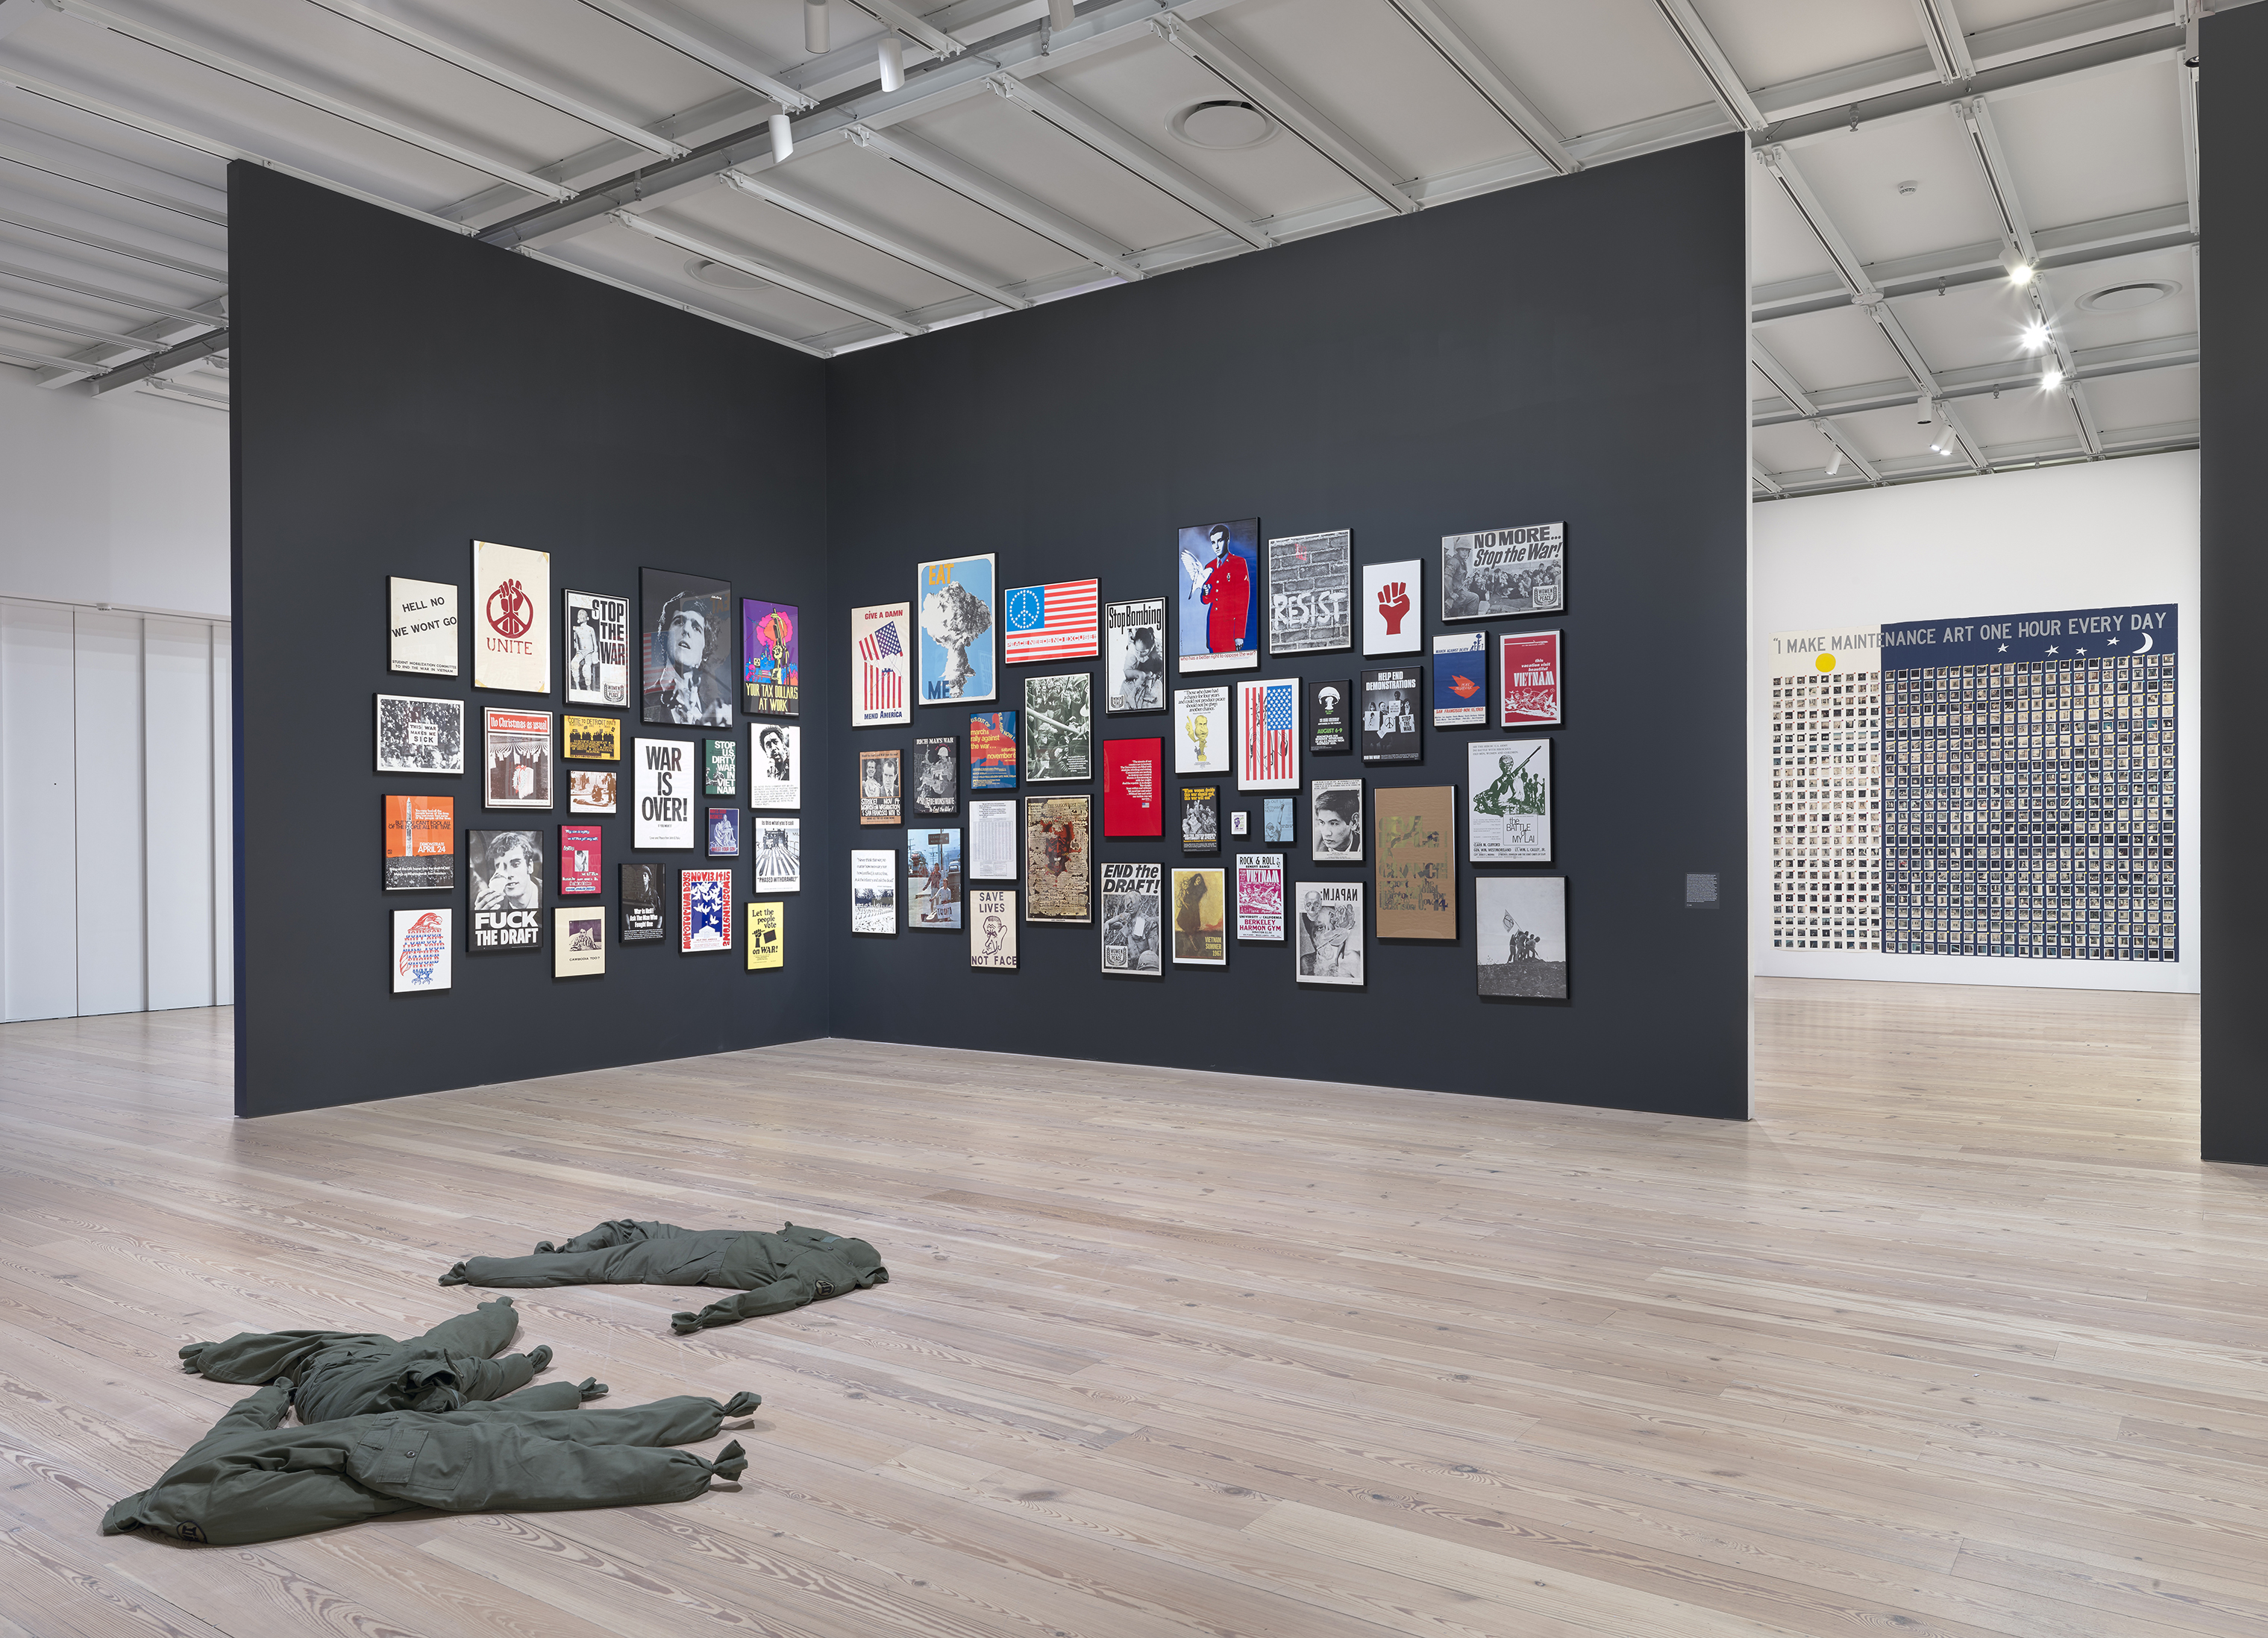 A scene from the Whitney’s 2017 exhibit “An Incomplete History of Protest” (Ron Amstutz)